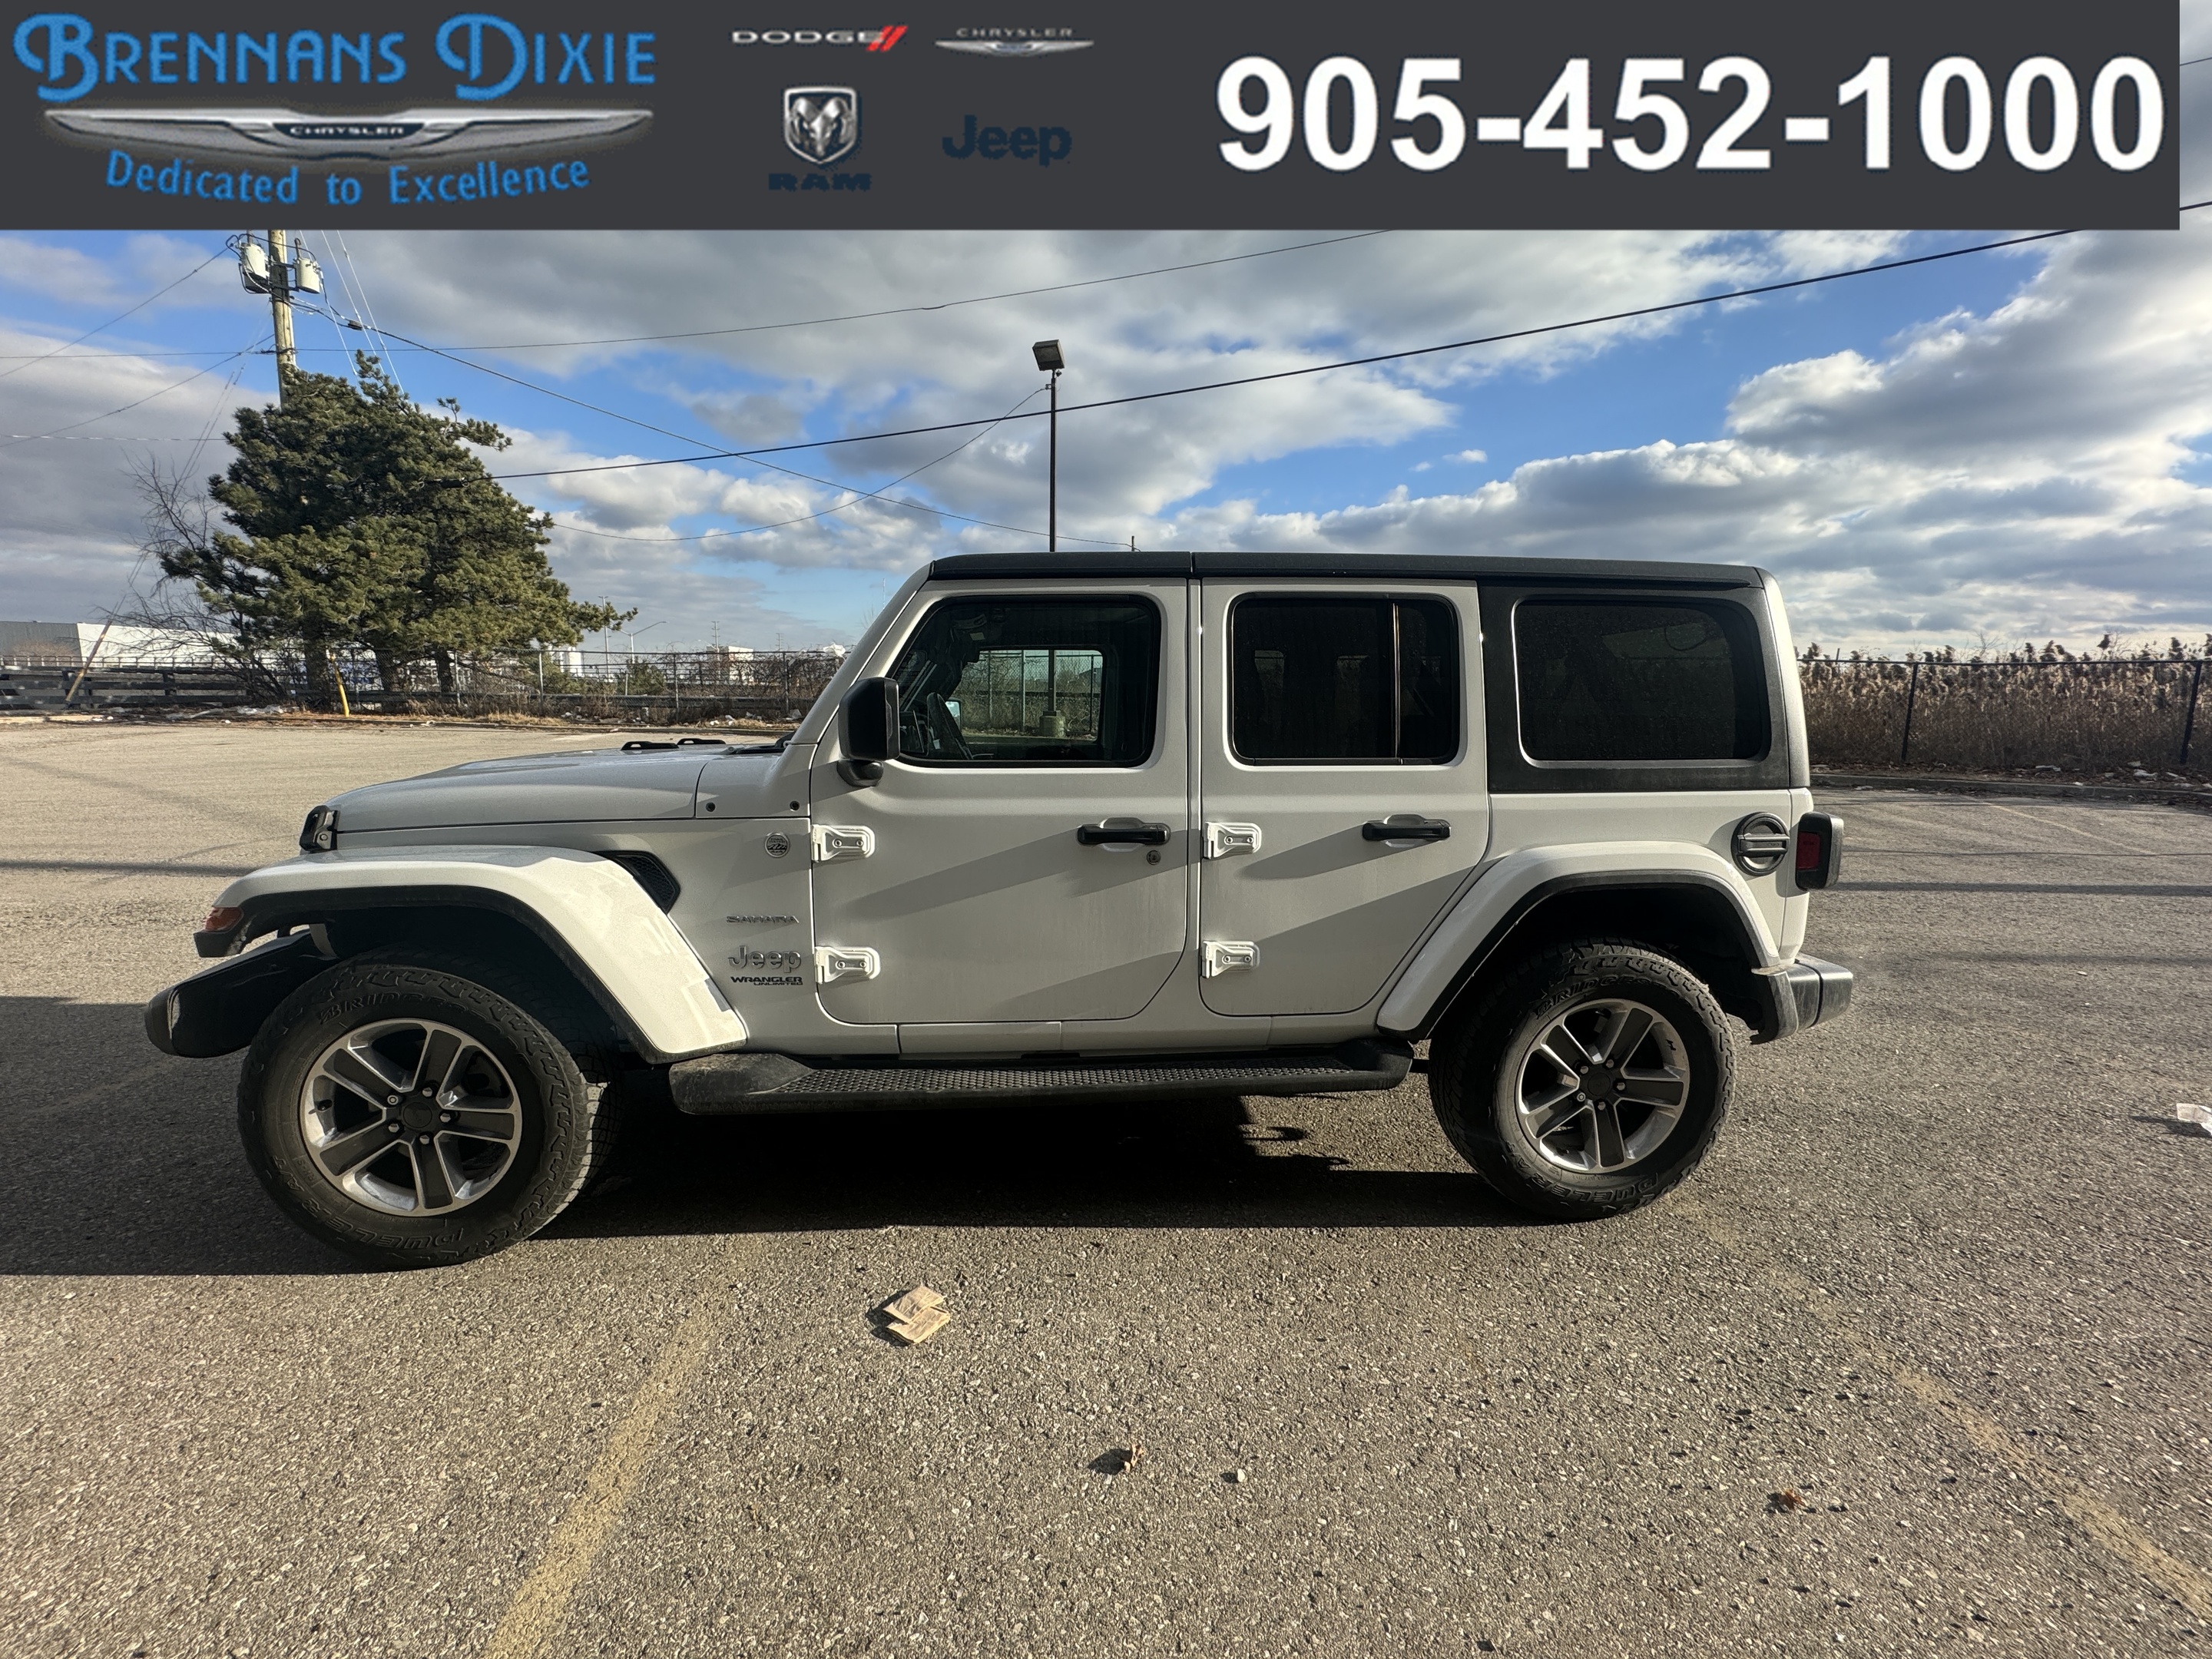 2021 Jeep WRANGLER UNLIMITED SAHARA, COLD WEATHER GROUP